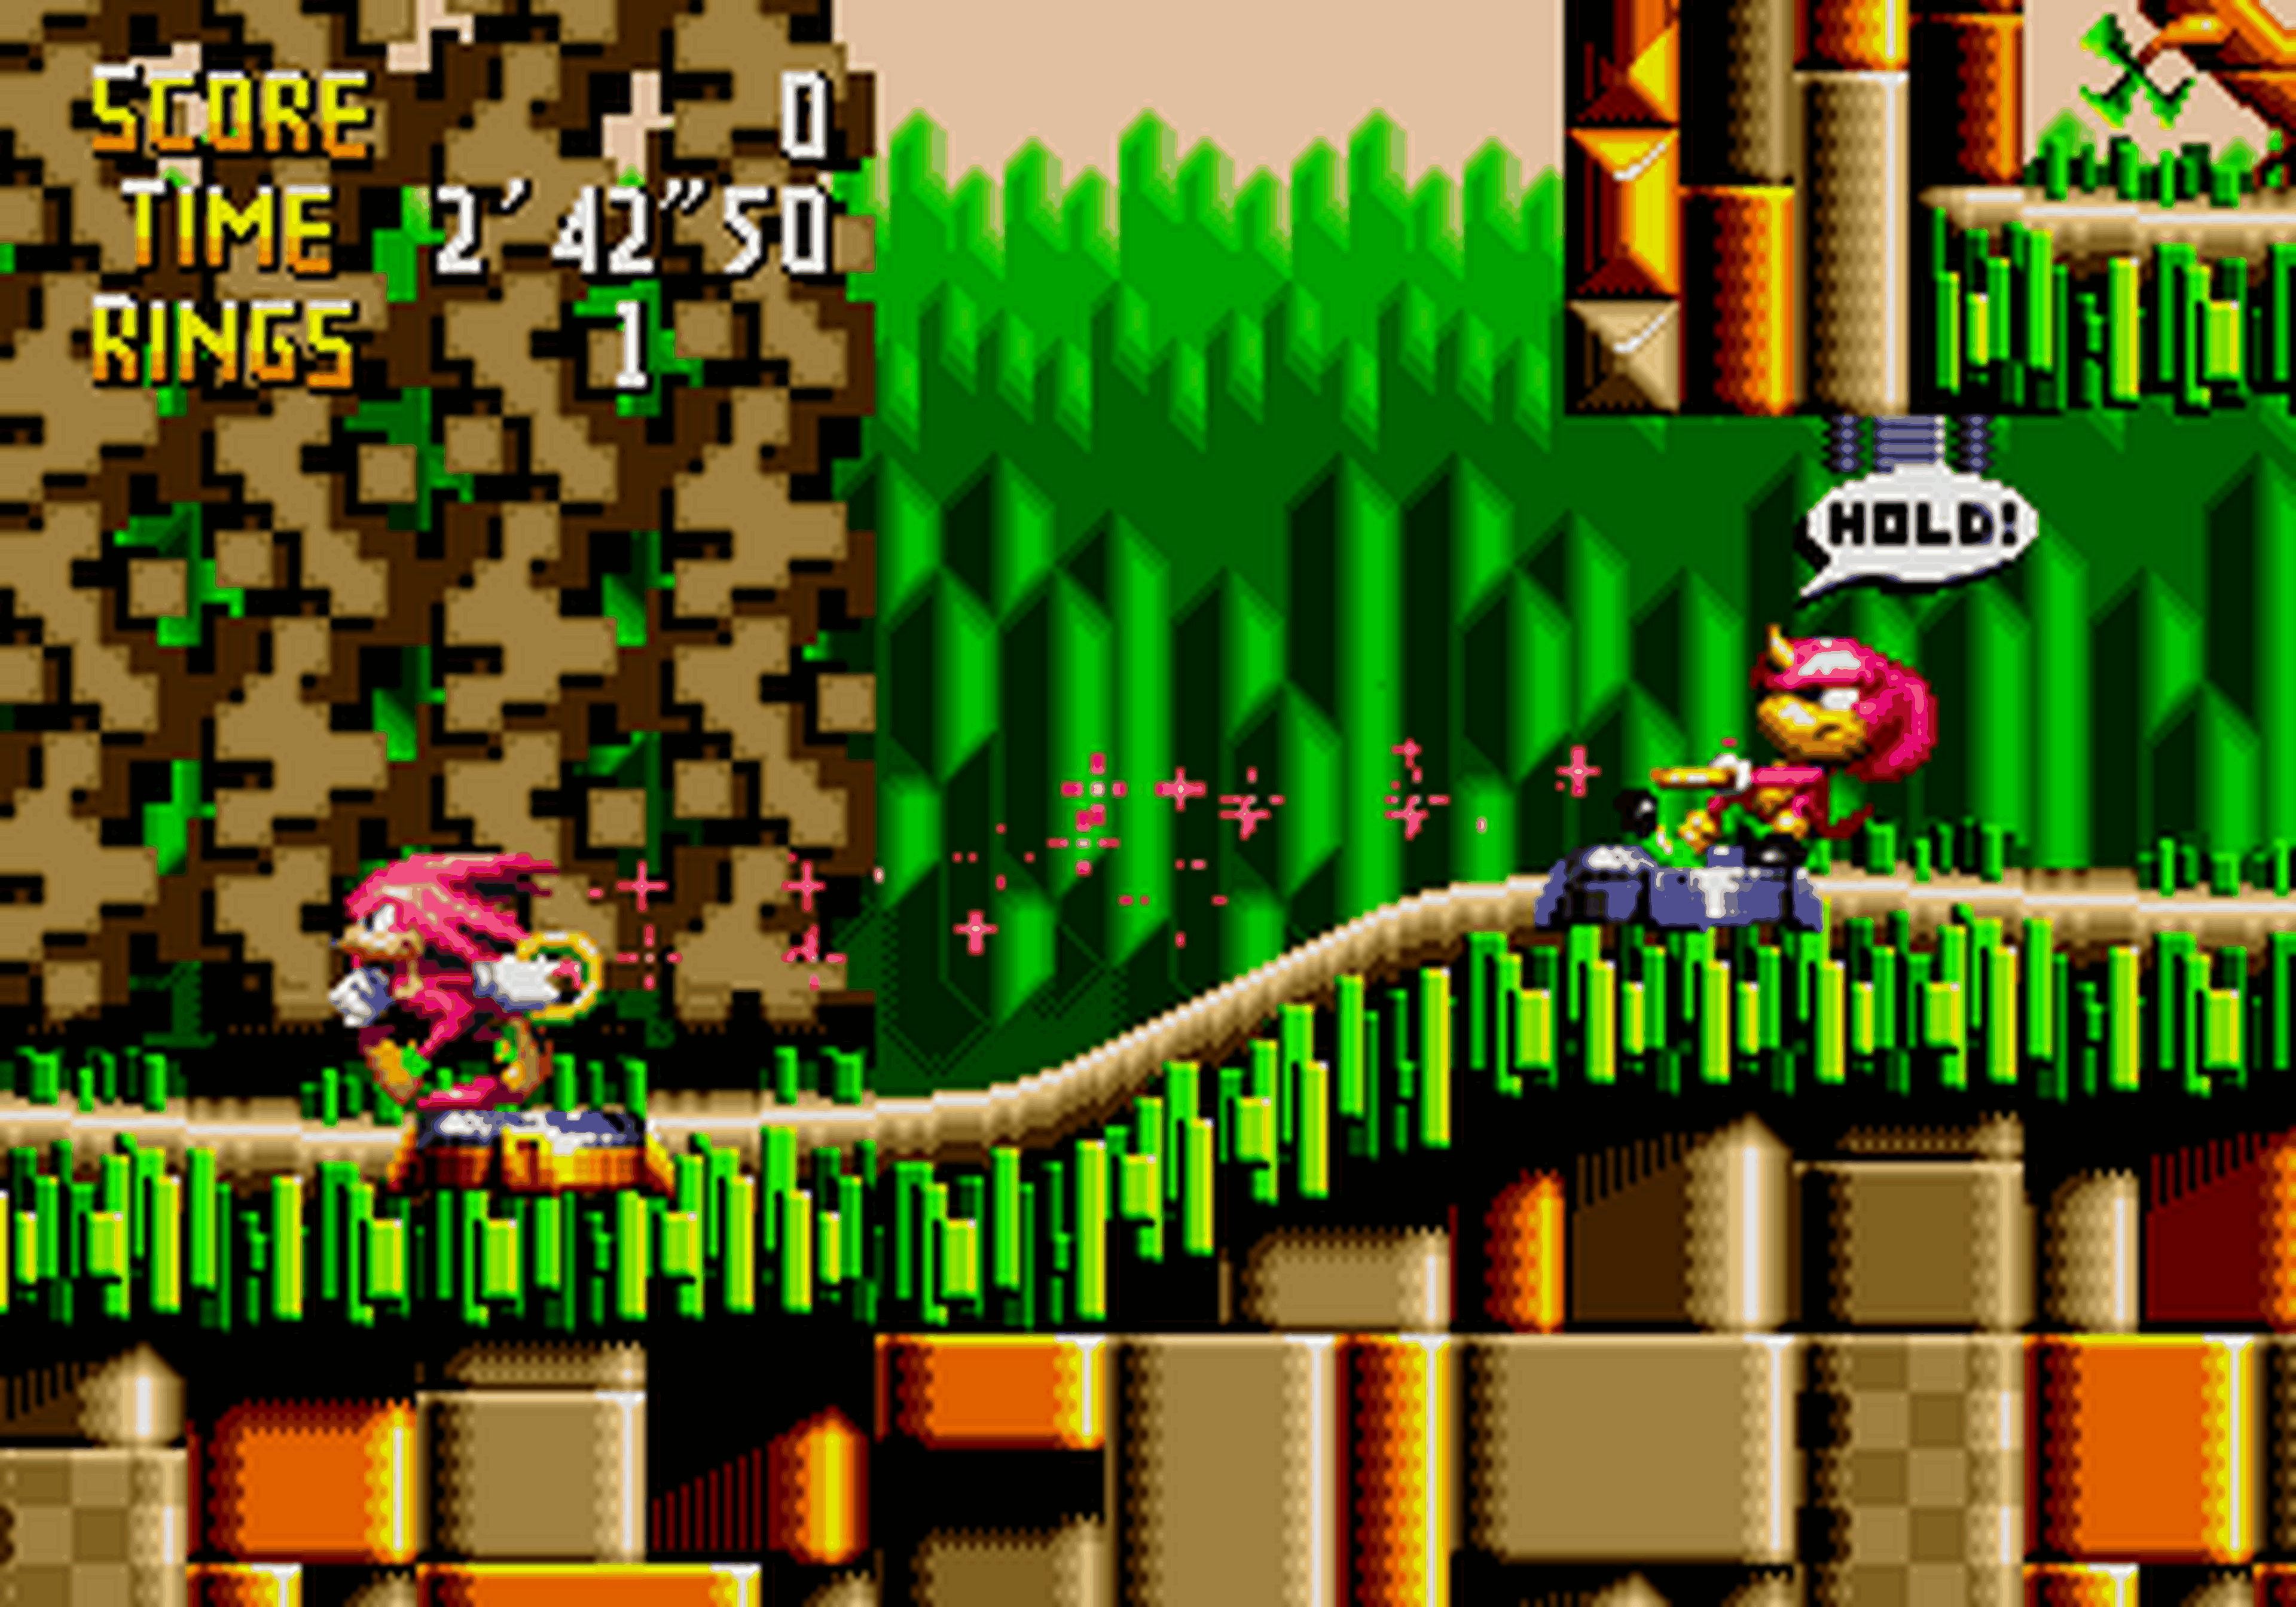 Hobby Consolas, hace 20 años: Knuckles' Chaotix